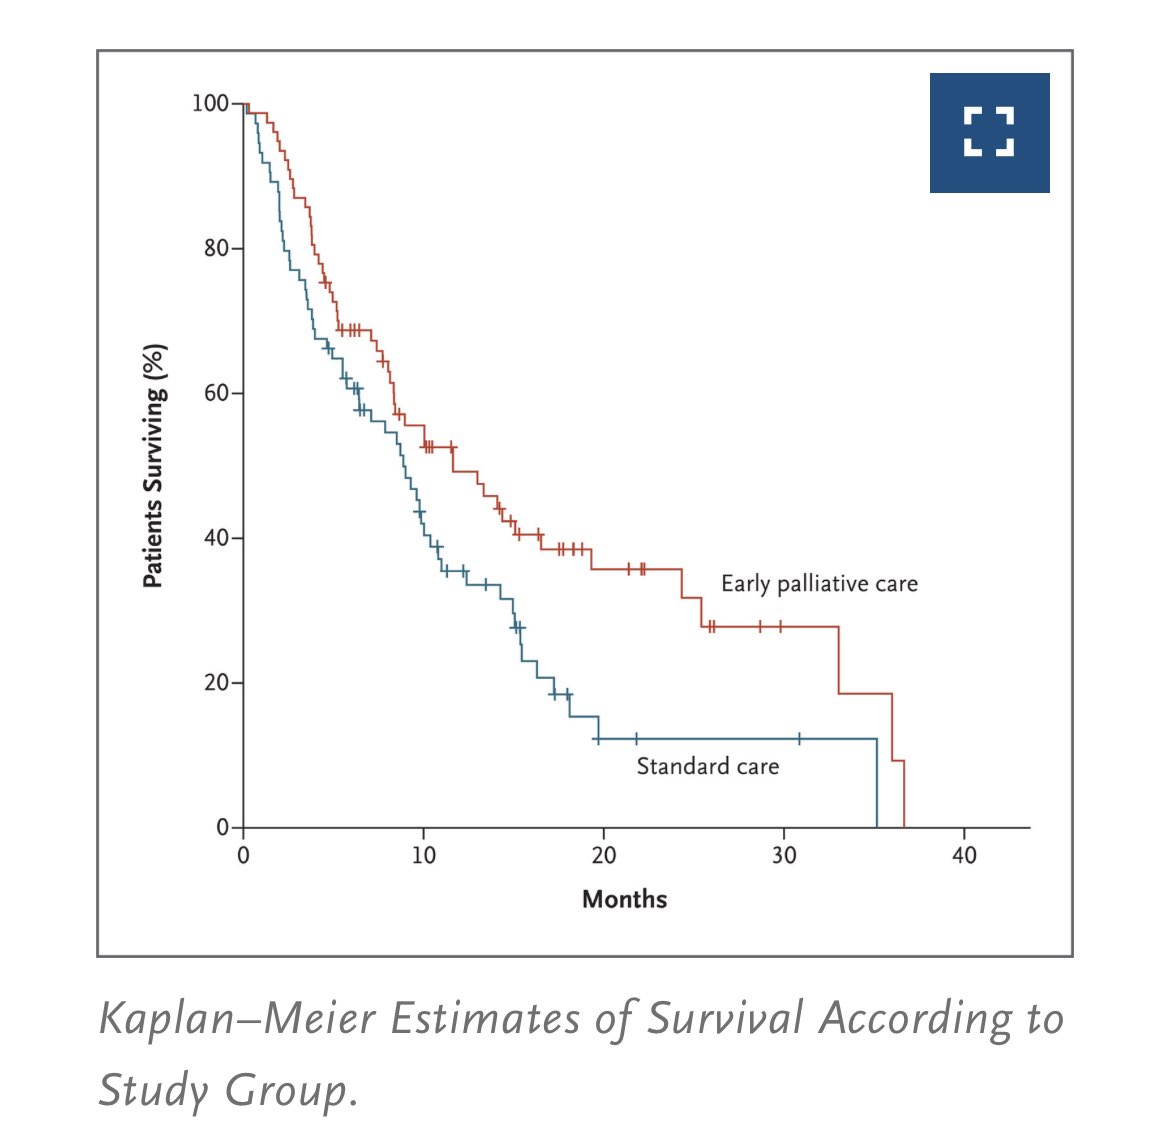 This reminds me of the @NEJM work randomizing early palliative care vs continued systemic therapy, palliative care conferred survival benefit nejm.org/doi/full/10.10…